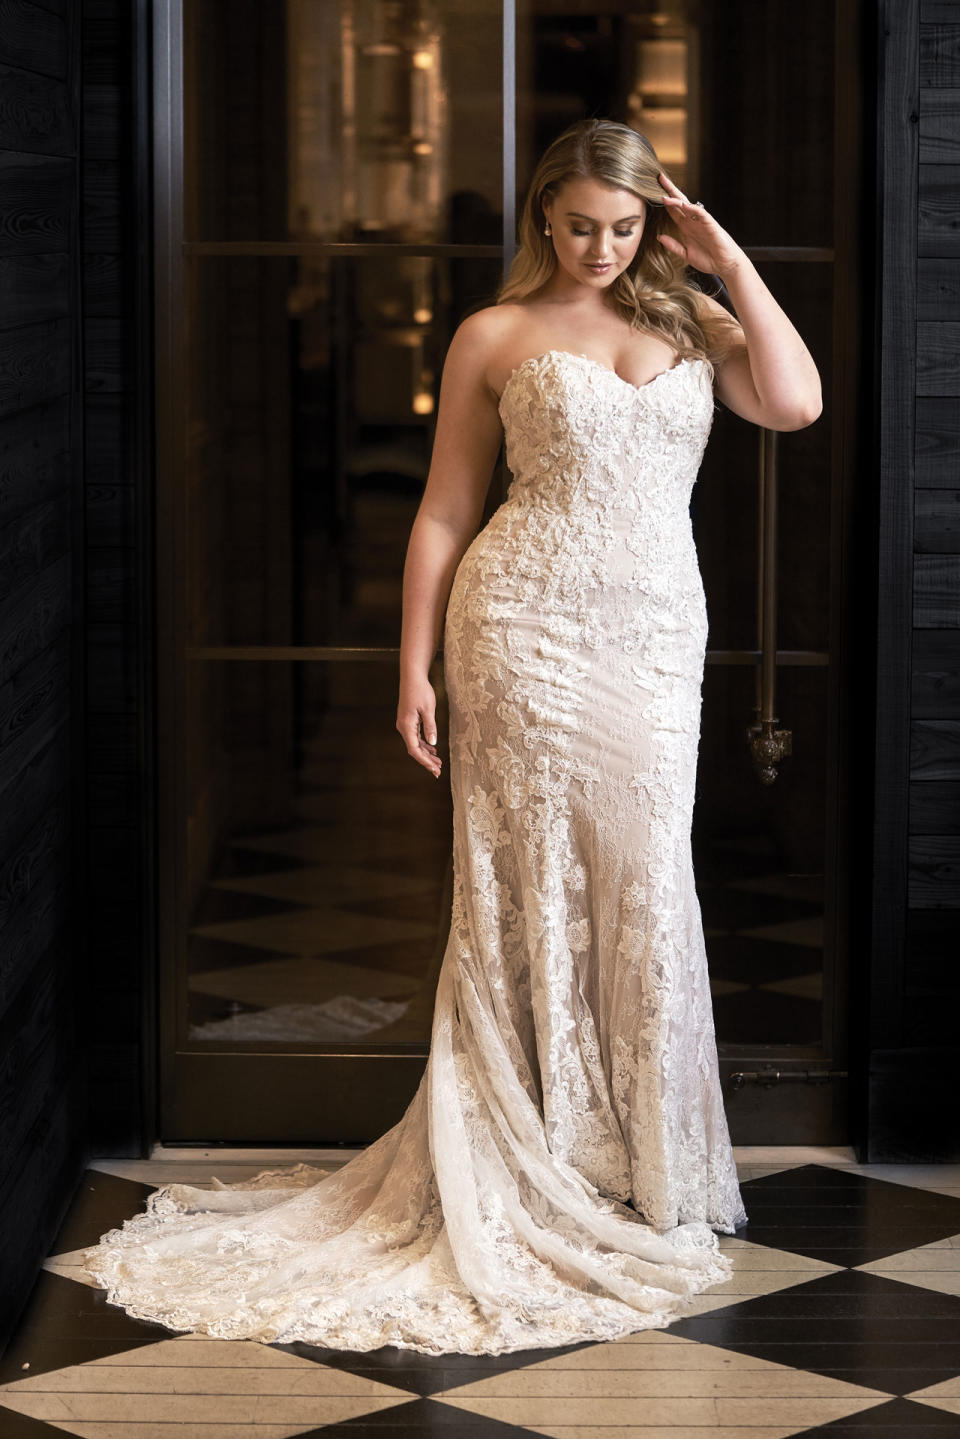 <p>Lawrence wears a strapless lace gown by Justin Alexander. (Photo: courtesy of Justin Alexander) </p>